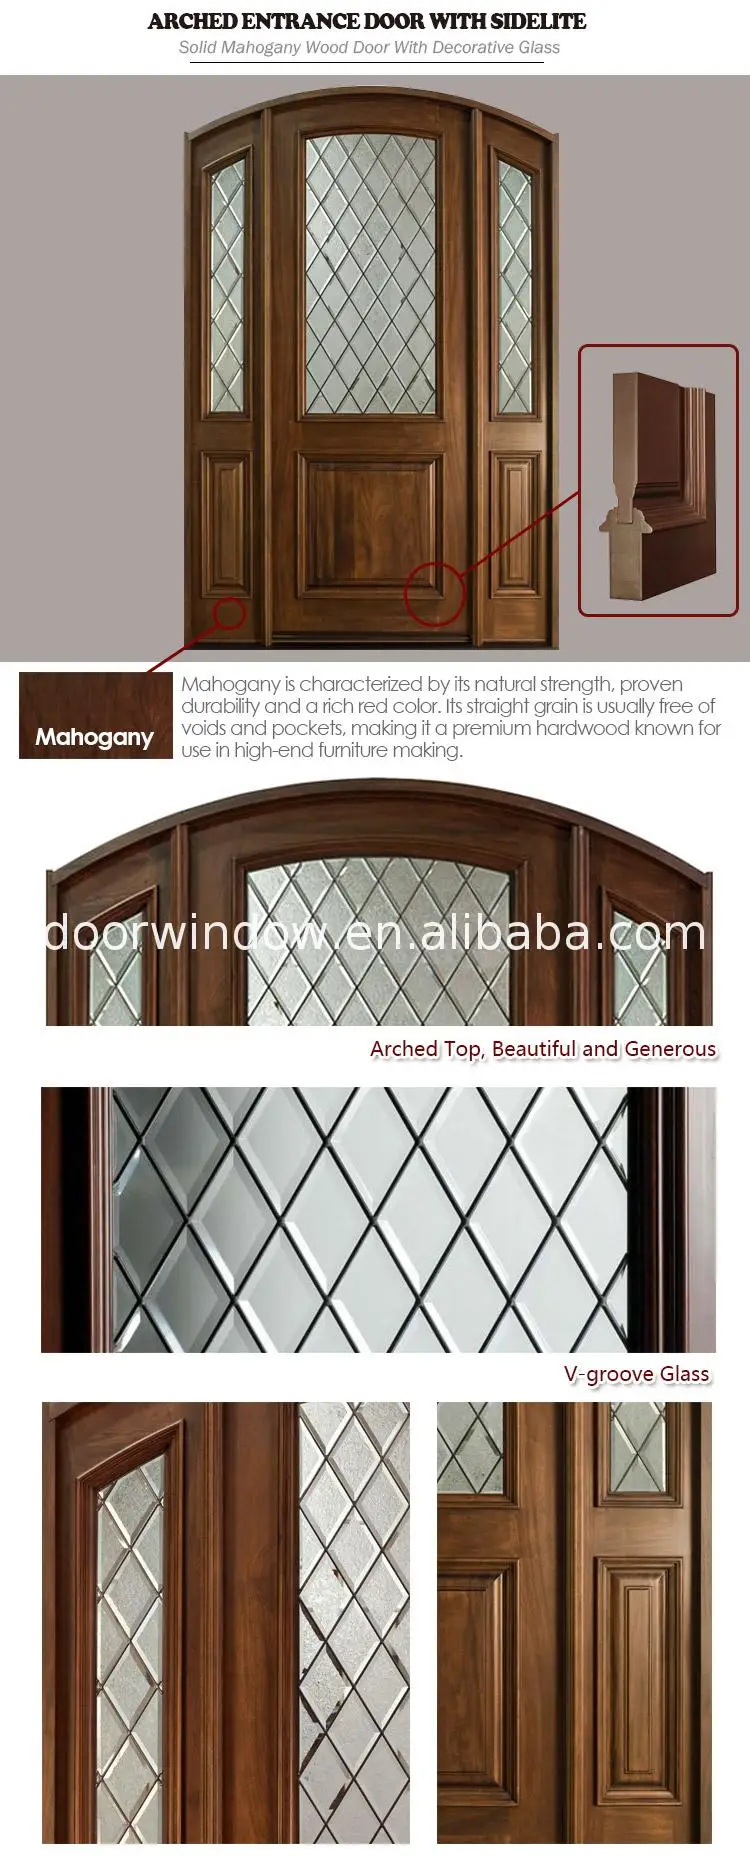 Best selling items wood entry doors with sidelights and transom beveled glass